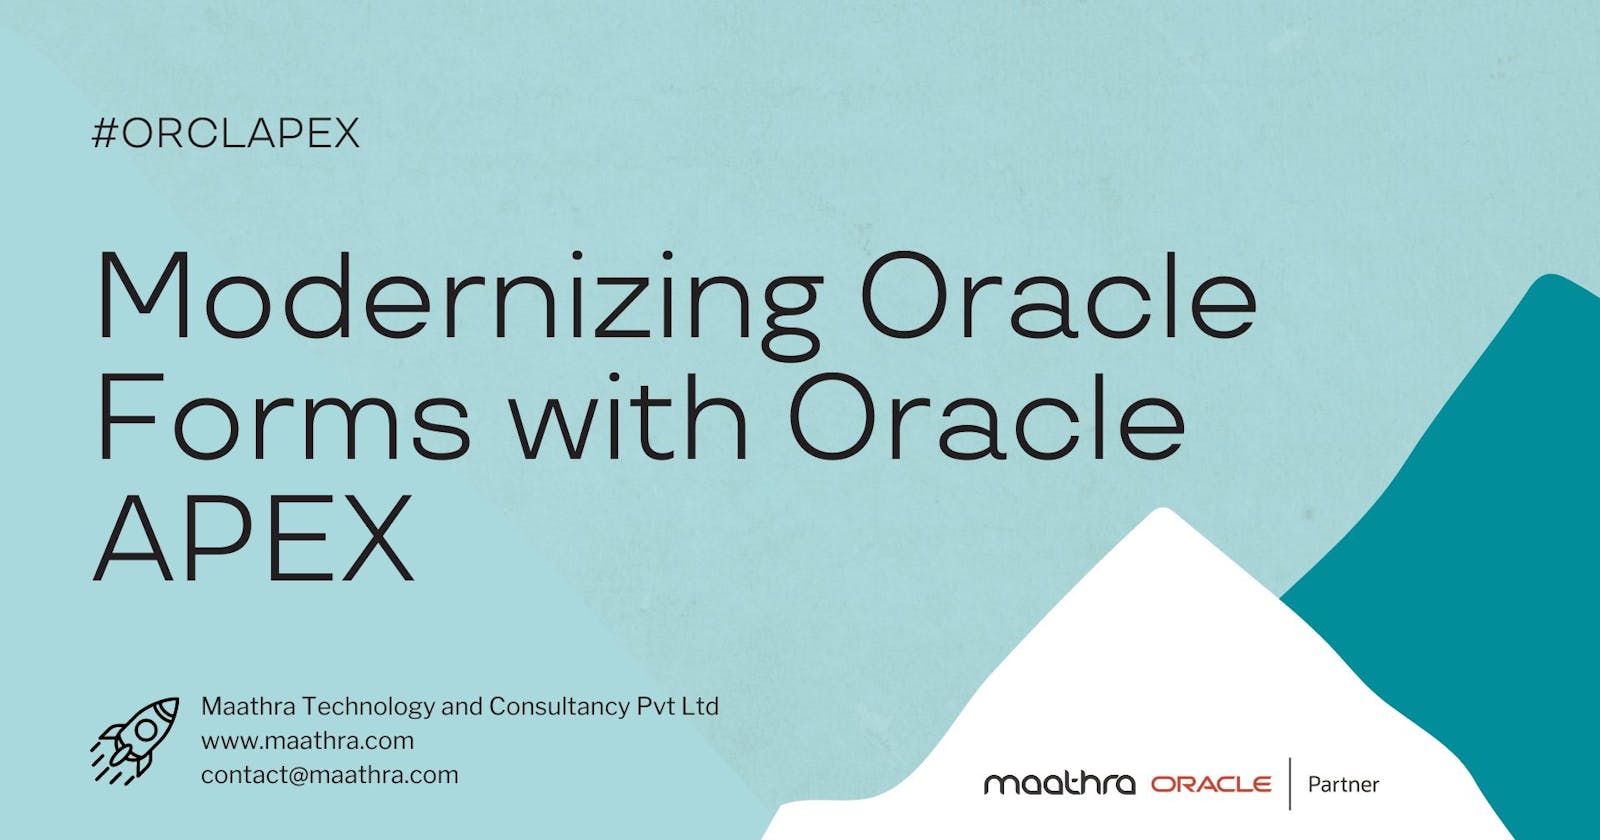 Oracle APEX Use Cases: Modernizing Oracle Forms